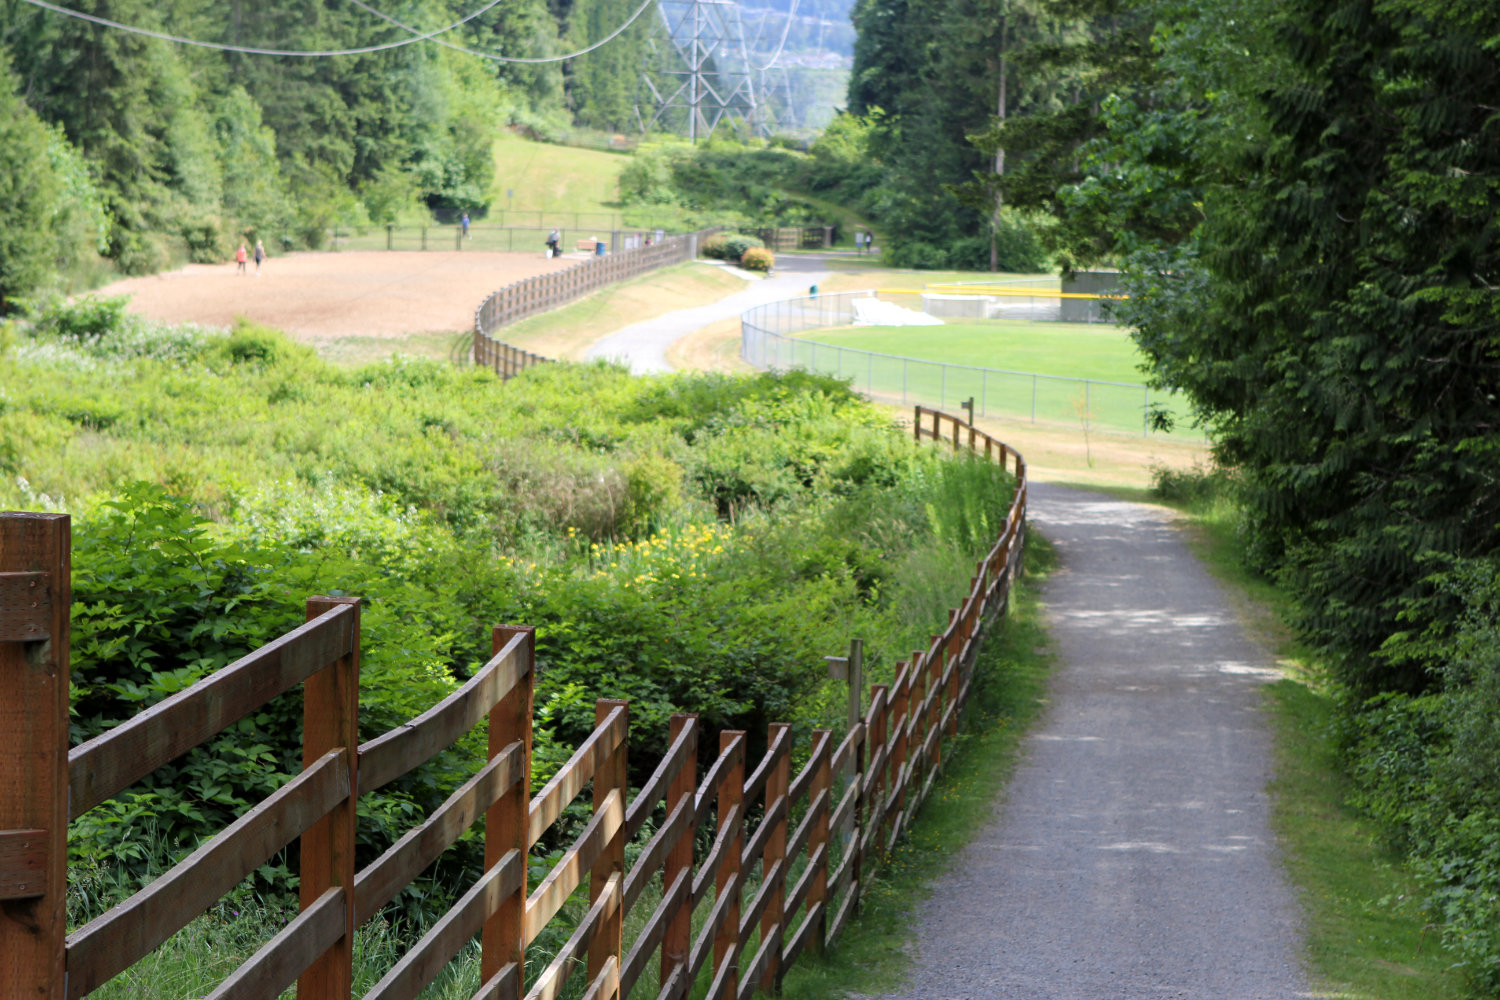 Paved walking path in Beaver Lake Park leading to baseball fields, path is fenced on left side, trees and shrubbery line the path